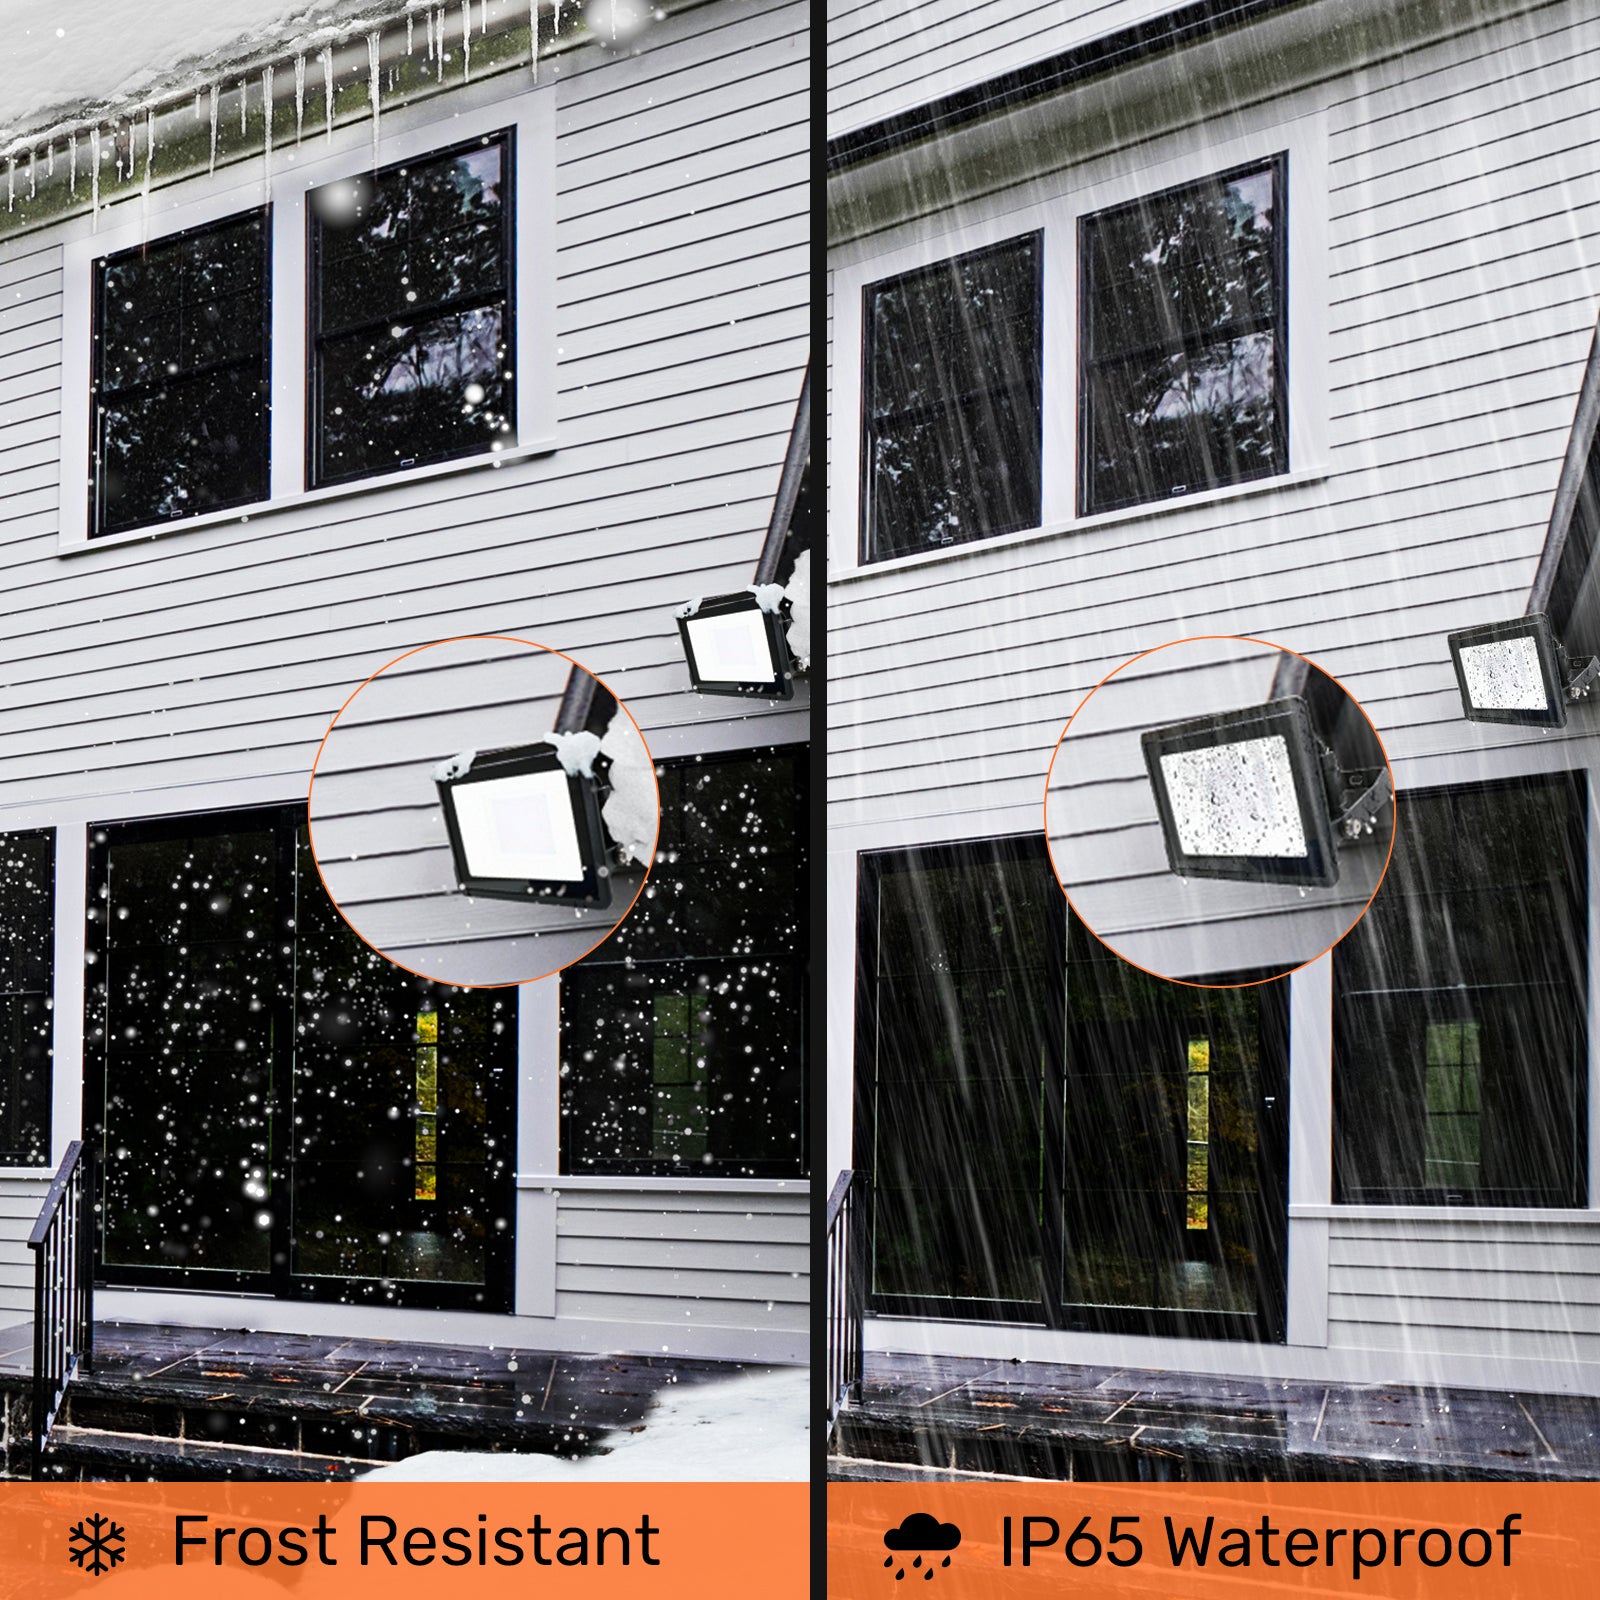 10W, LED Floodlights, 1000 Lumens, 6500K Day Light, Non-Dimmable Spotlights